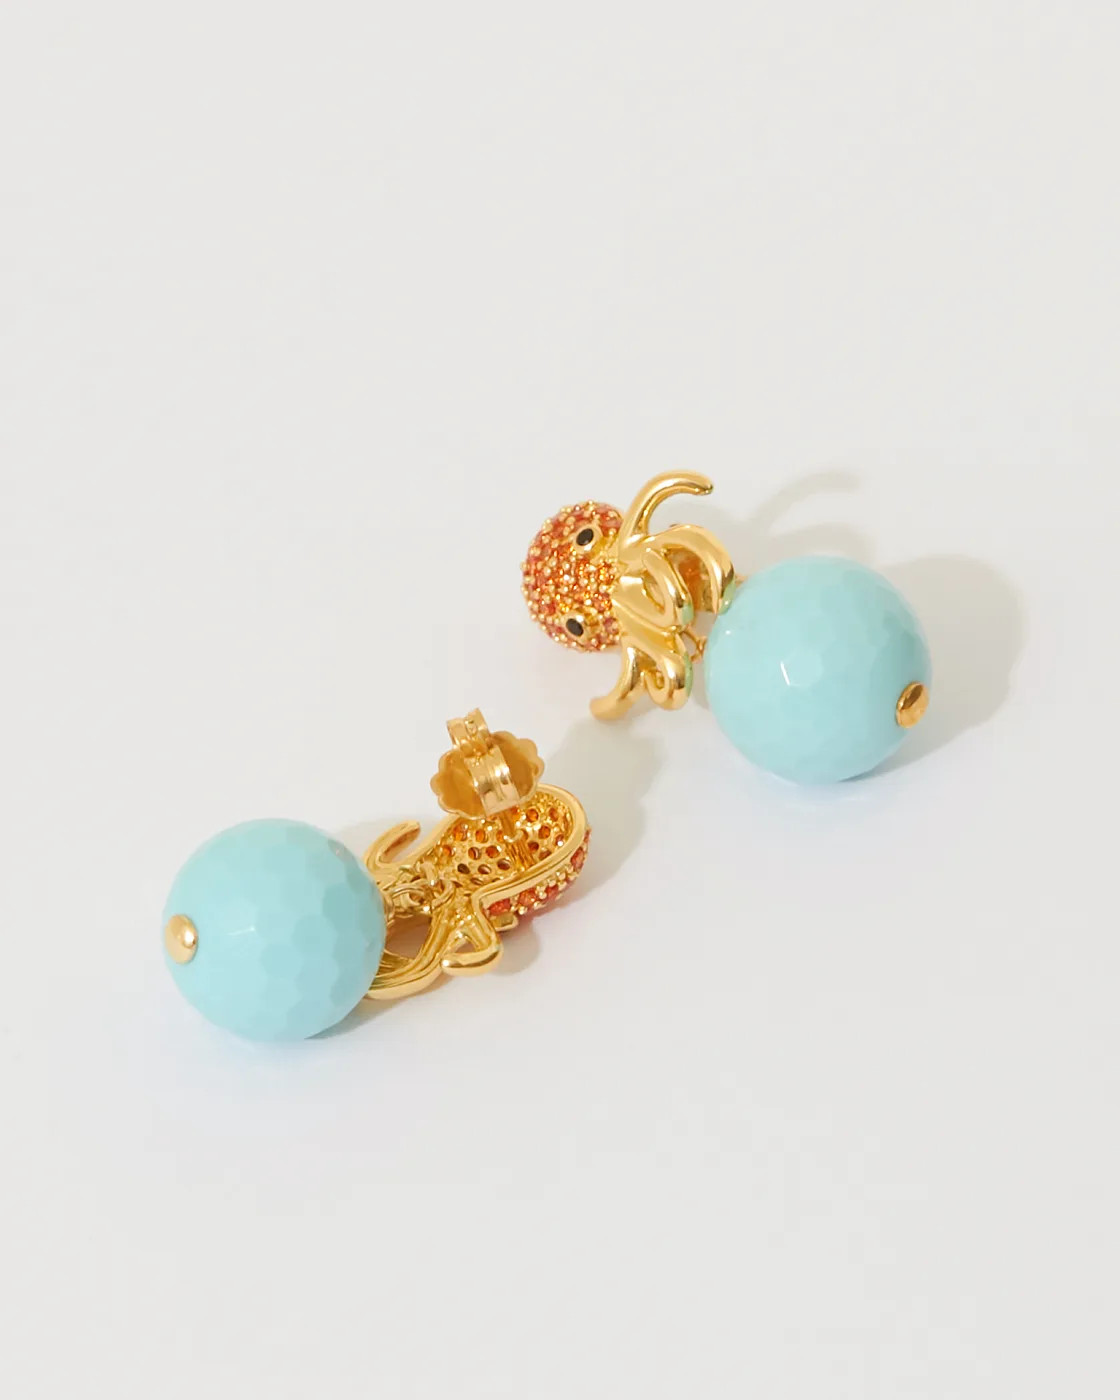 Krill Octopus Stud Earrings with Turquoise